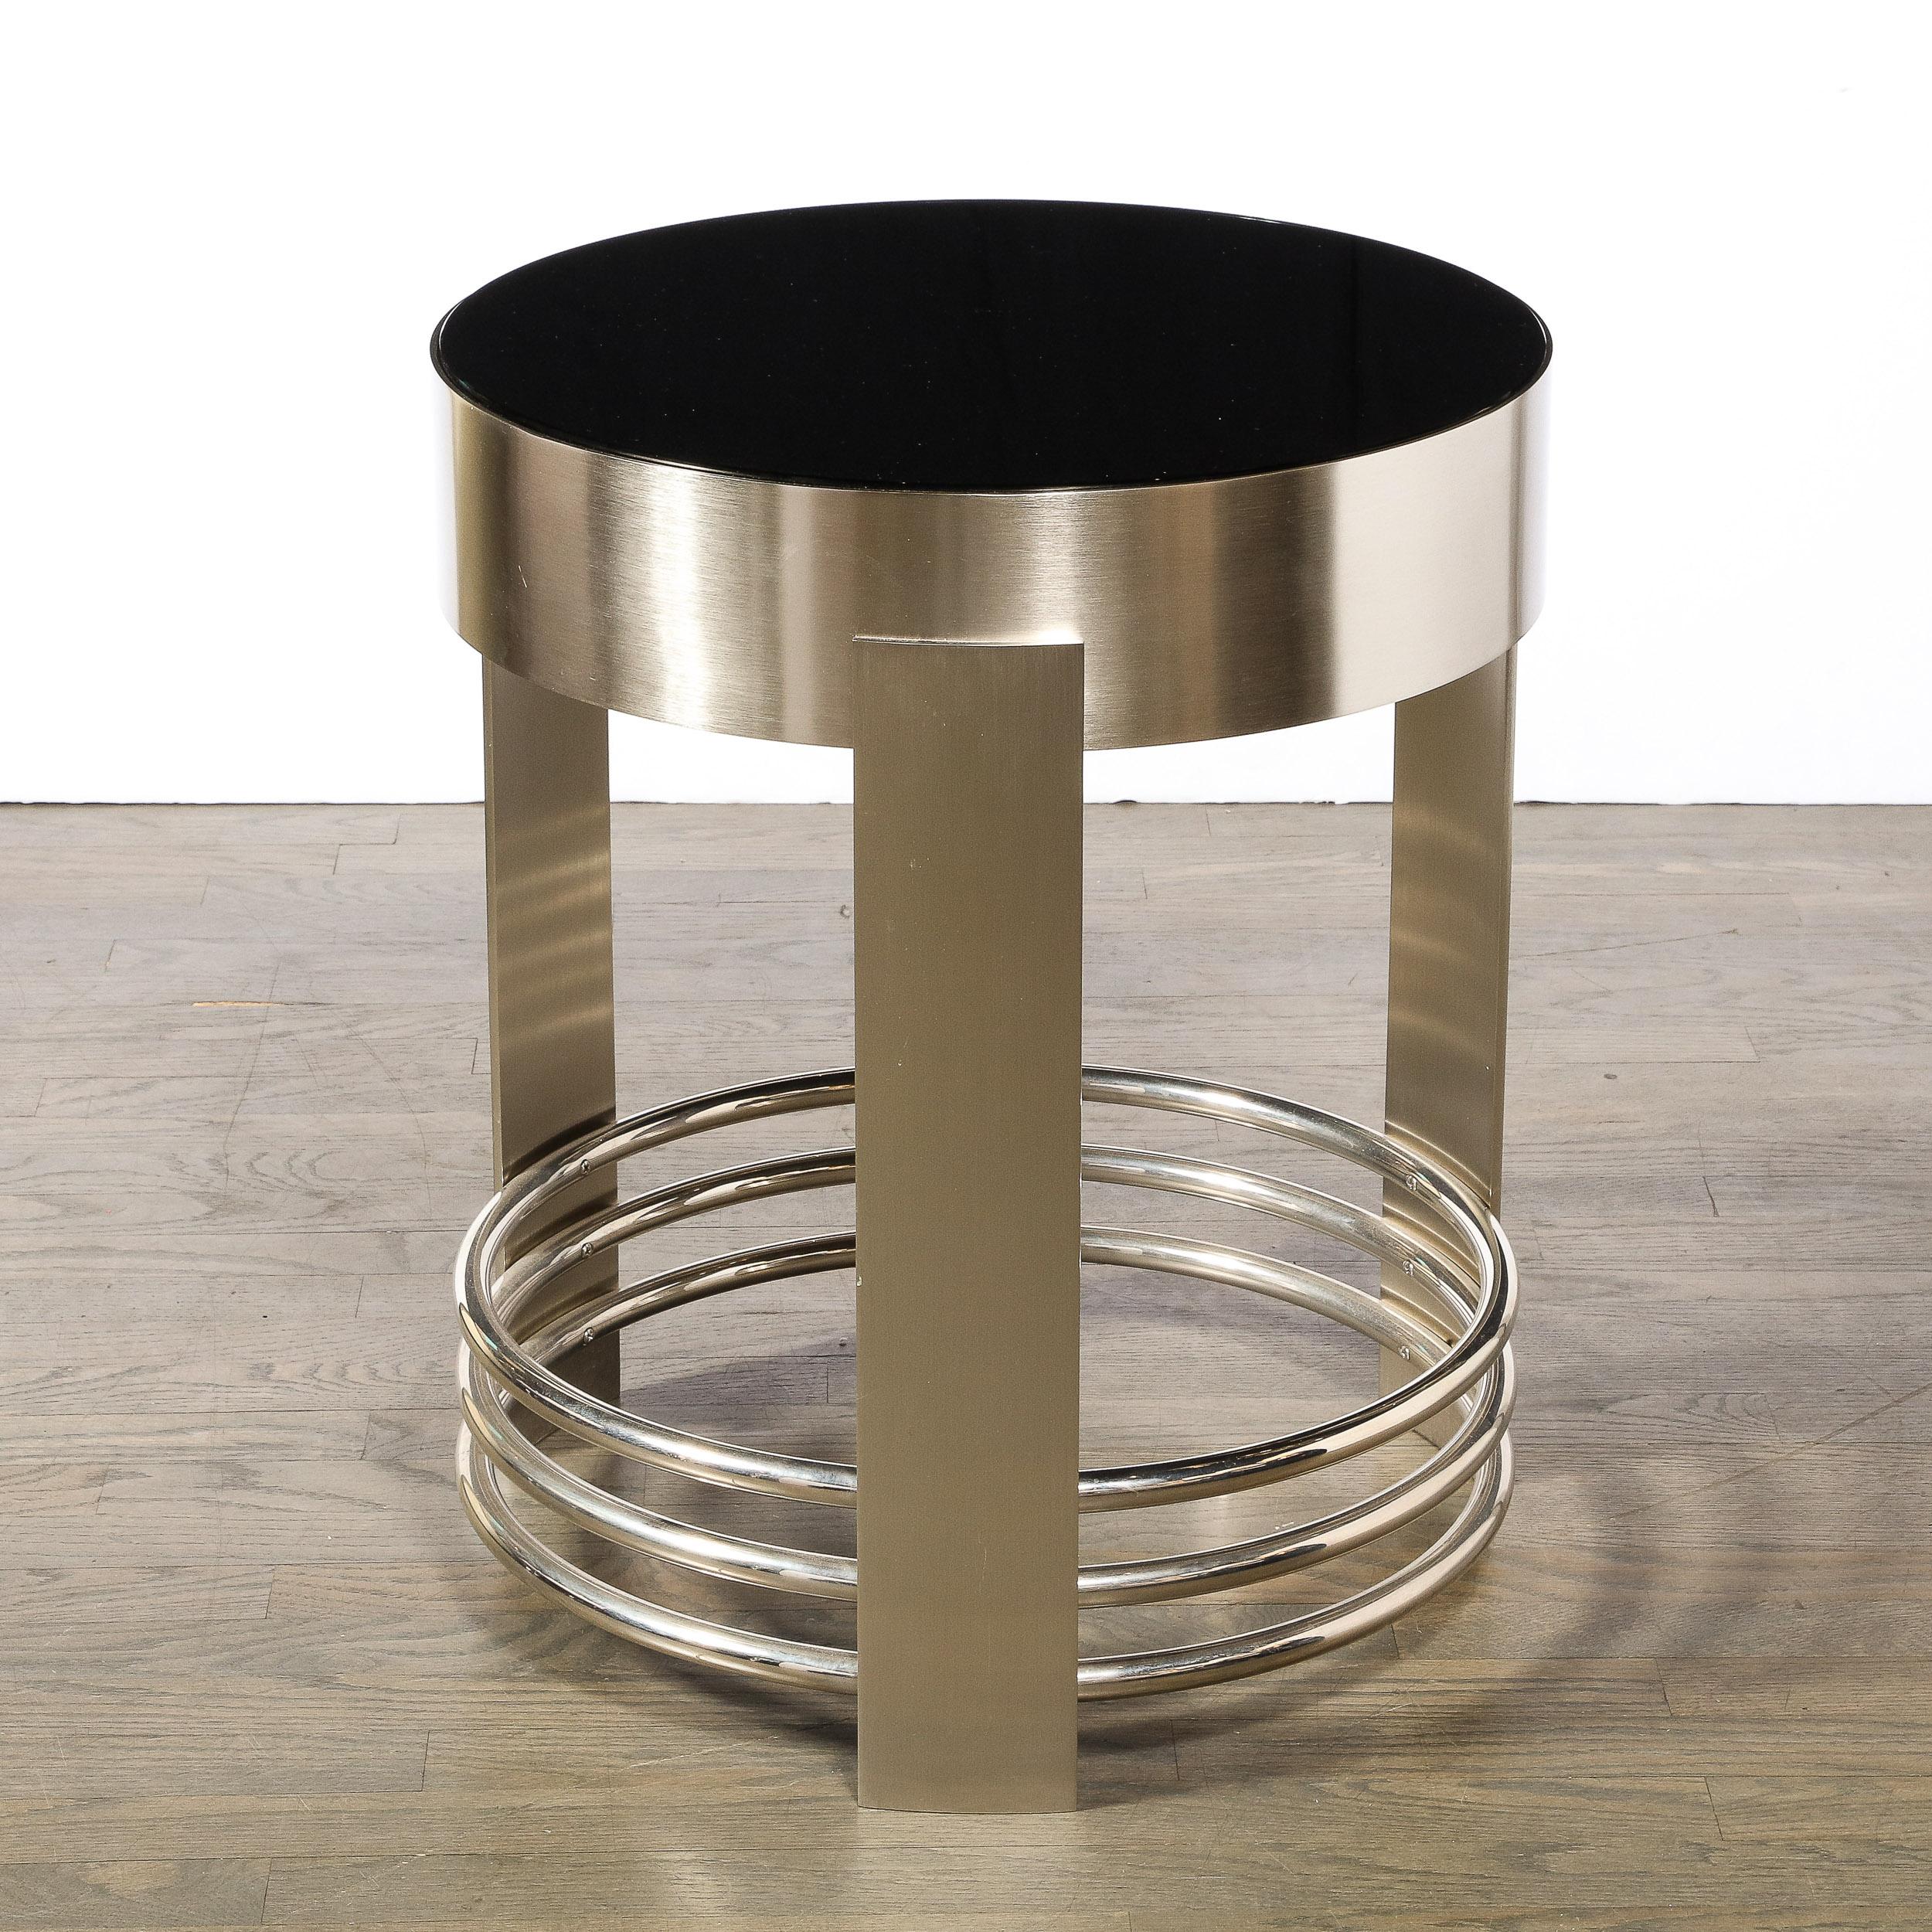 Art Deco Revival Occasional Table in Brushed Nickel with Polished Banding 7